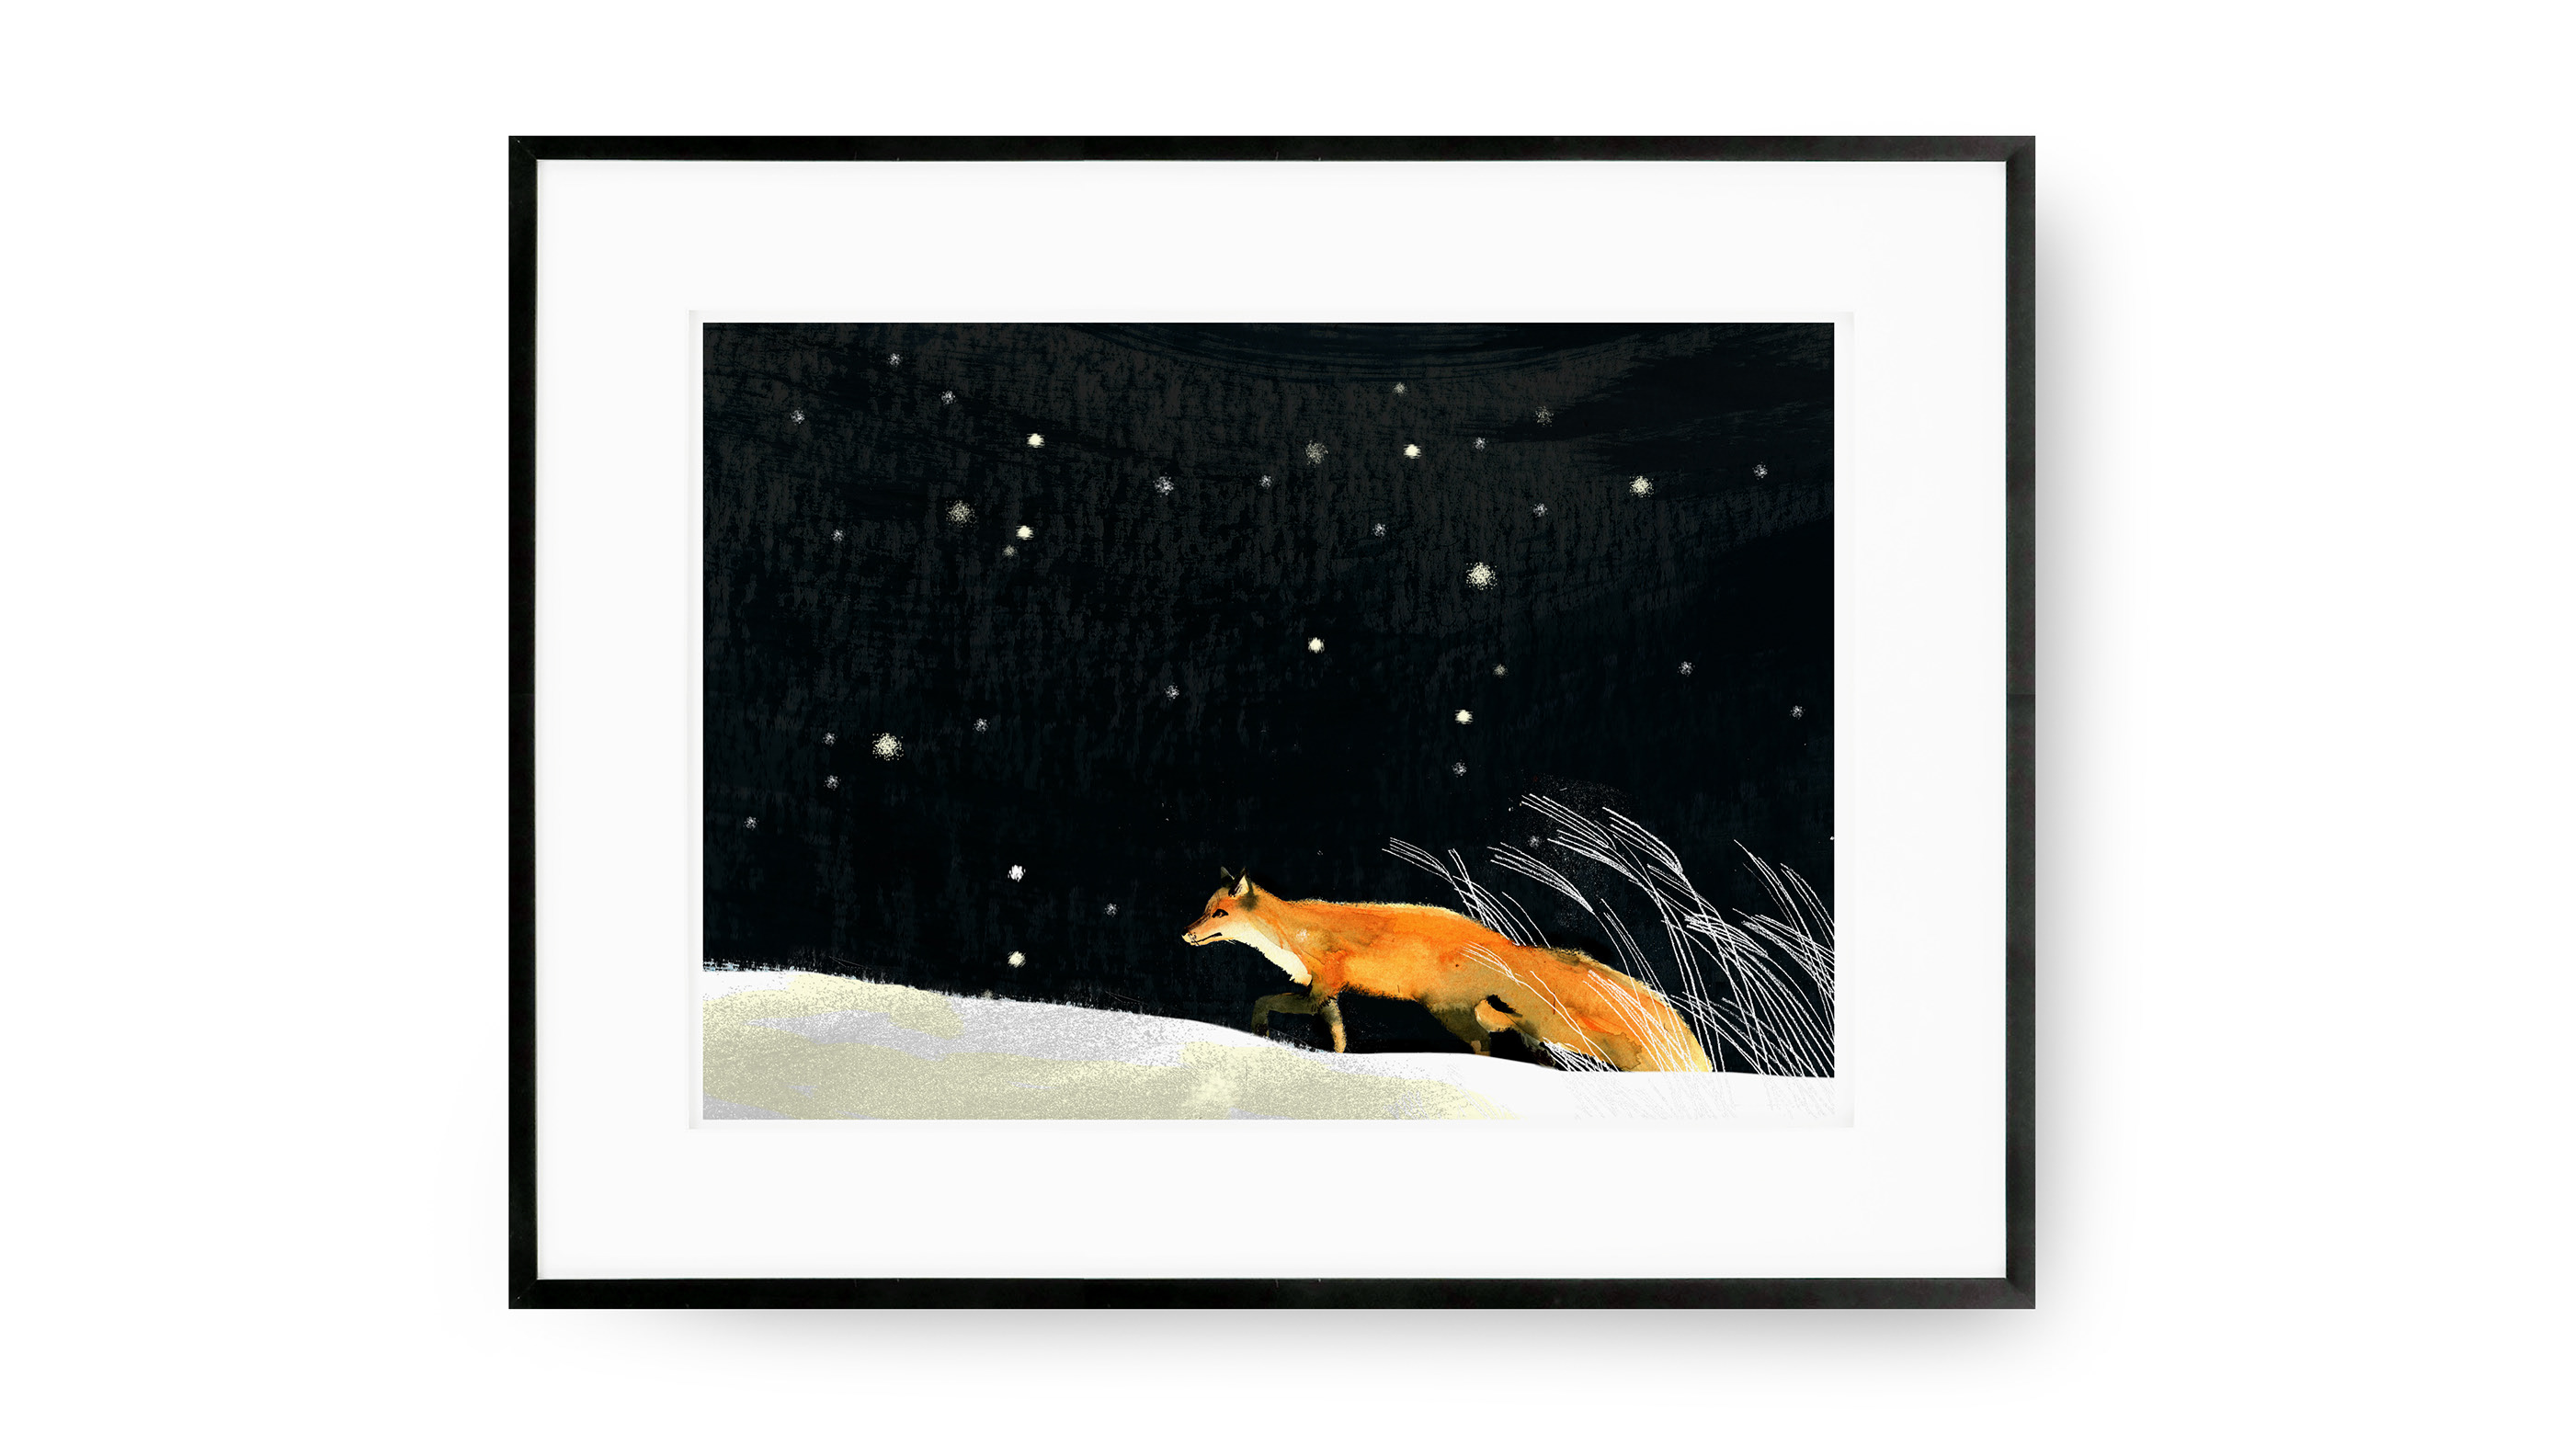 Our foxes on Behance